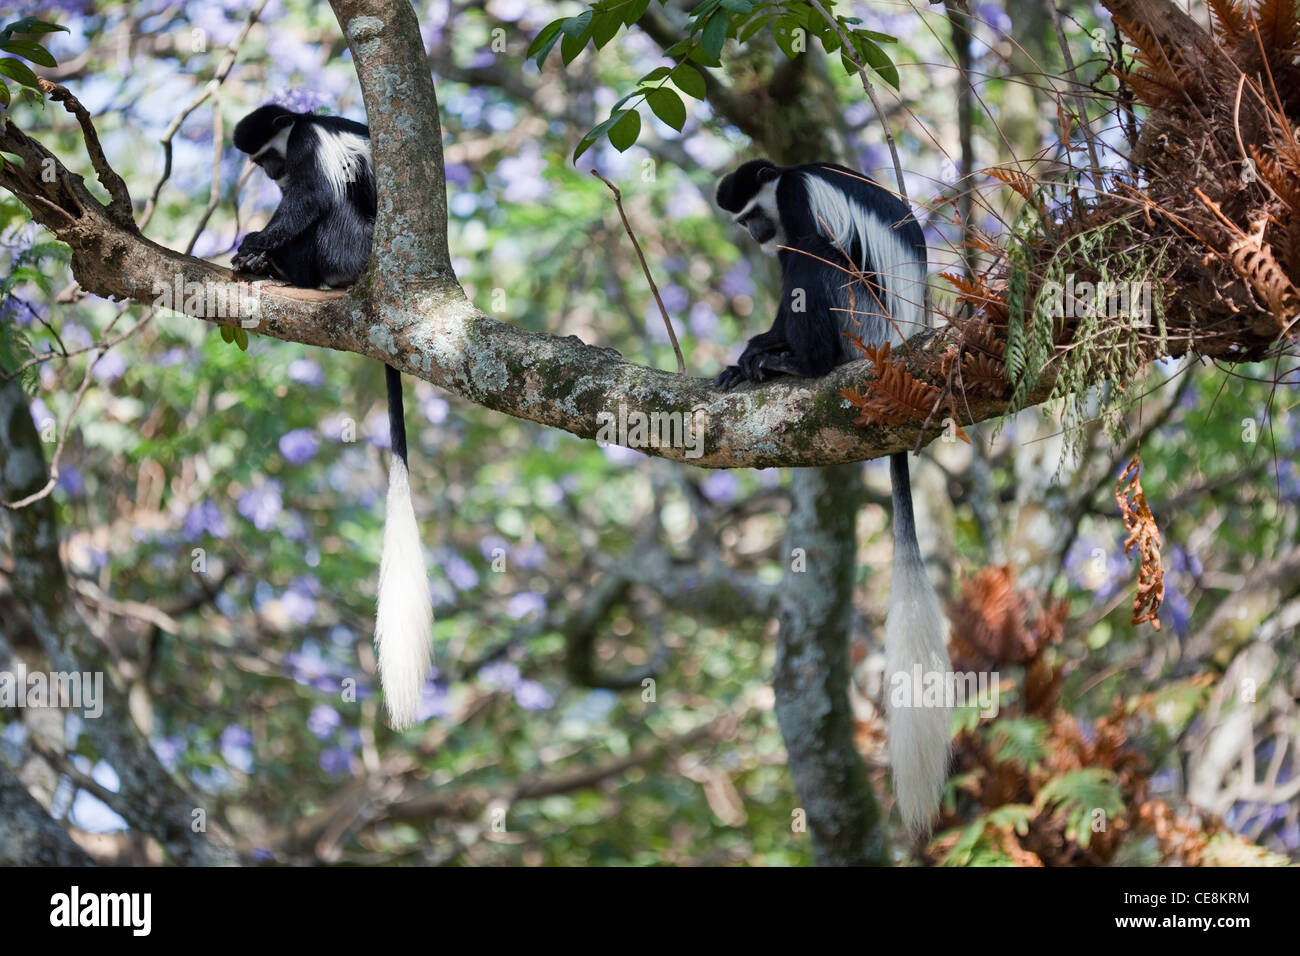 Abyssinian Black and White Colobus Monkeys or Guereza (Colubus abyssinicus). Pair. Stock Photo